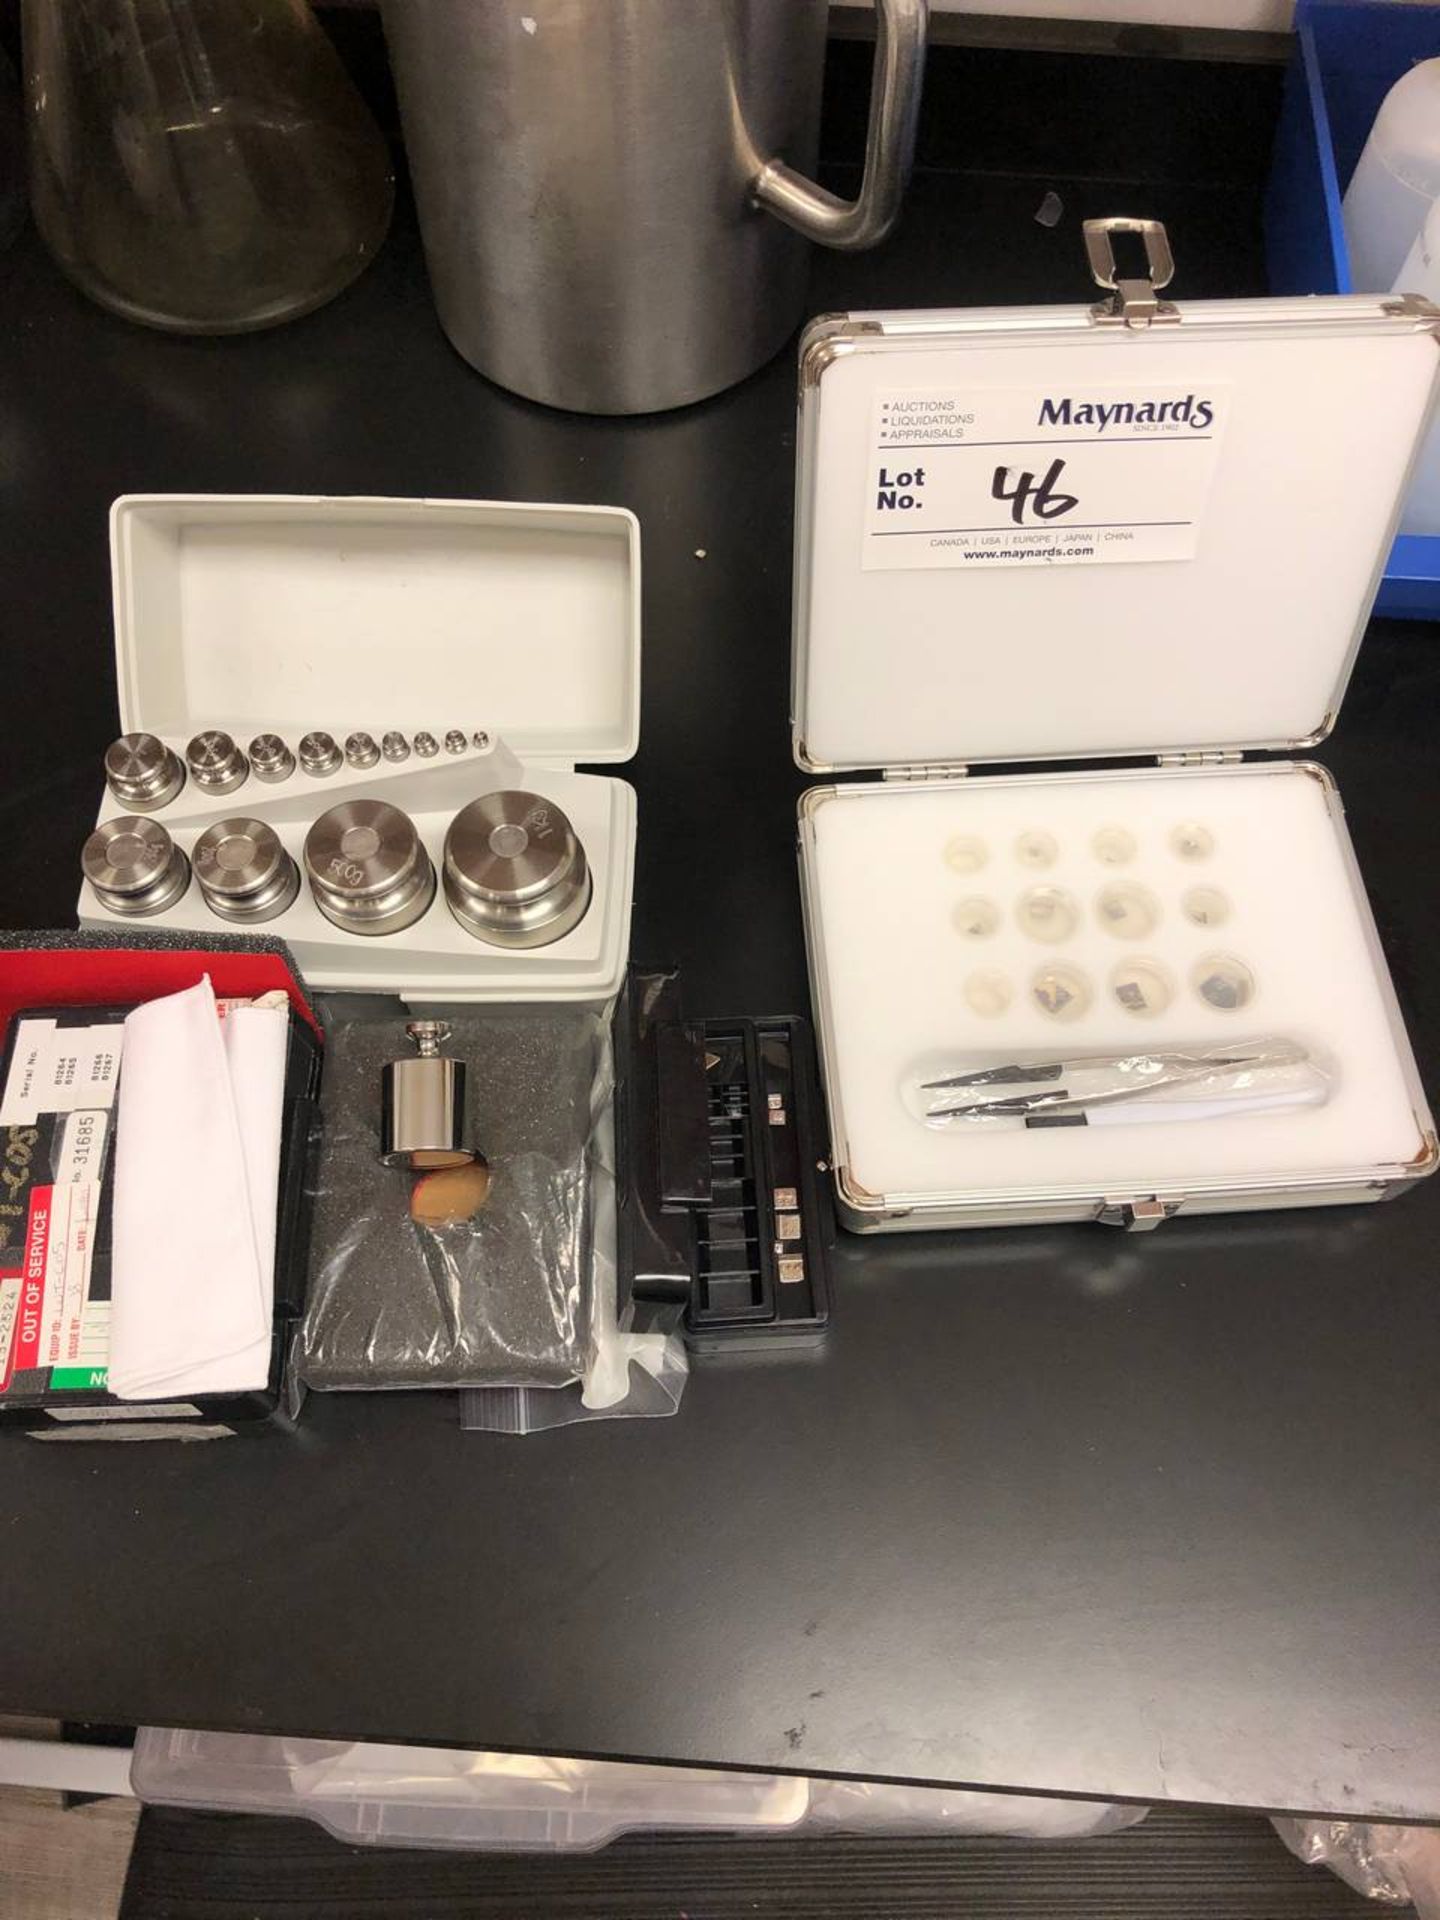 Mettler Toledo Weights and Measure kit for Balance Calibration